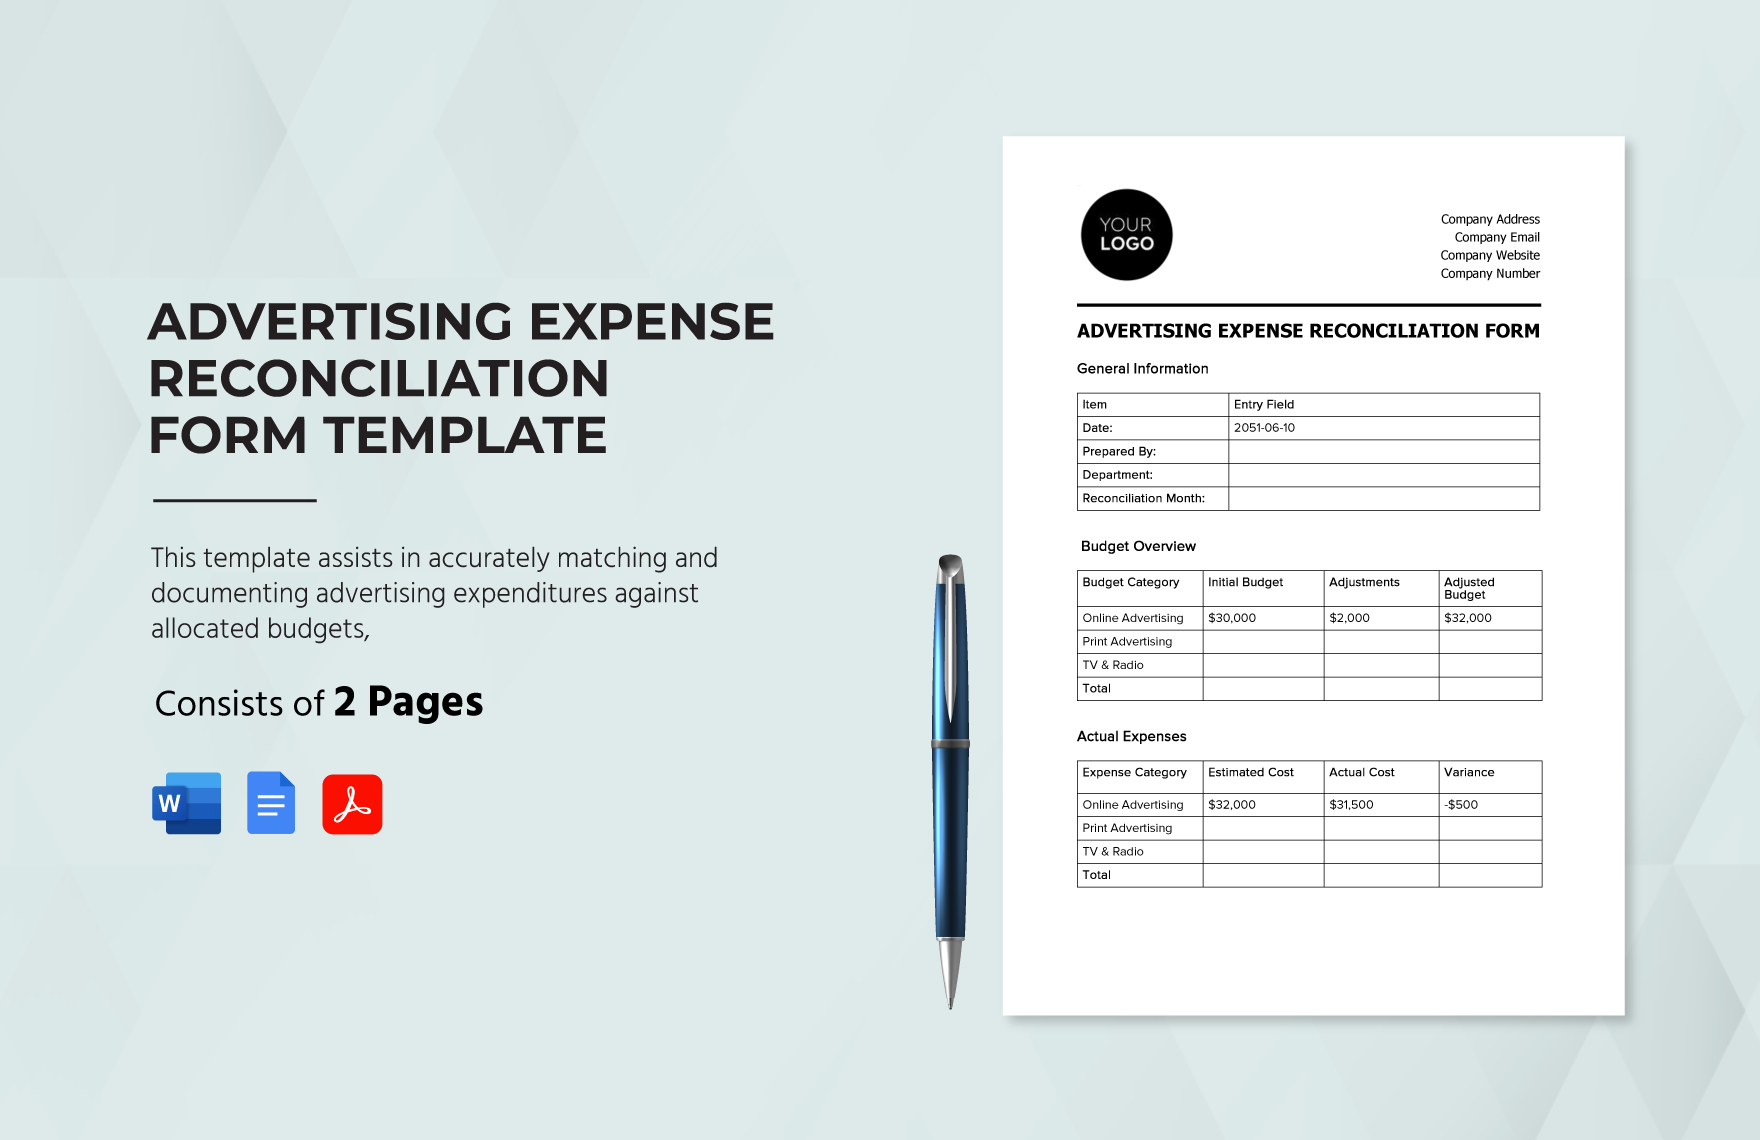 Advertising Expense Reconciliation Form Template in Word, Google Docs, PDF